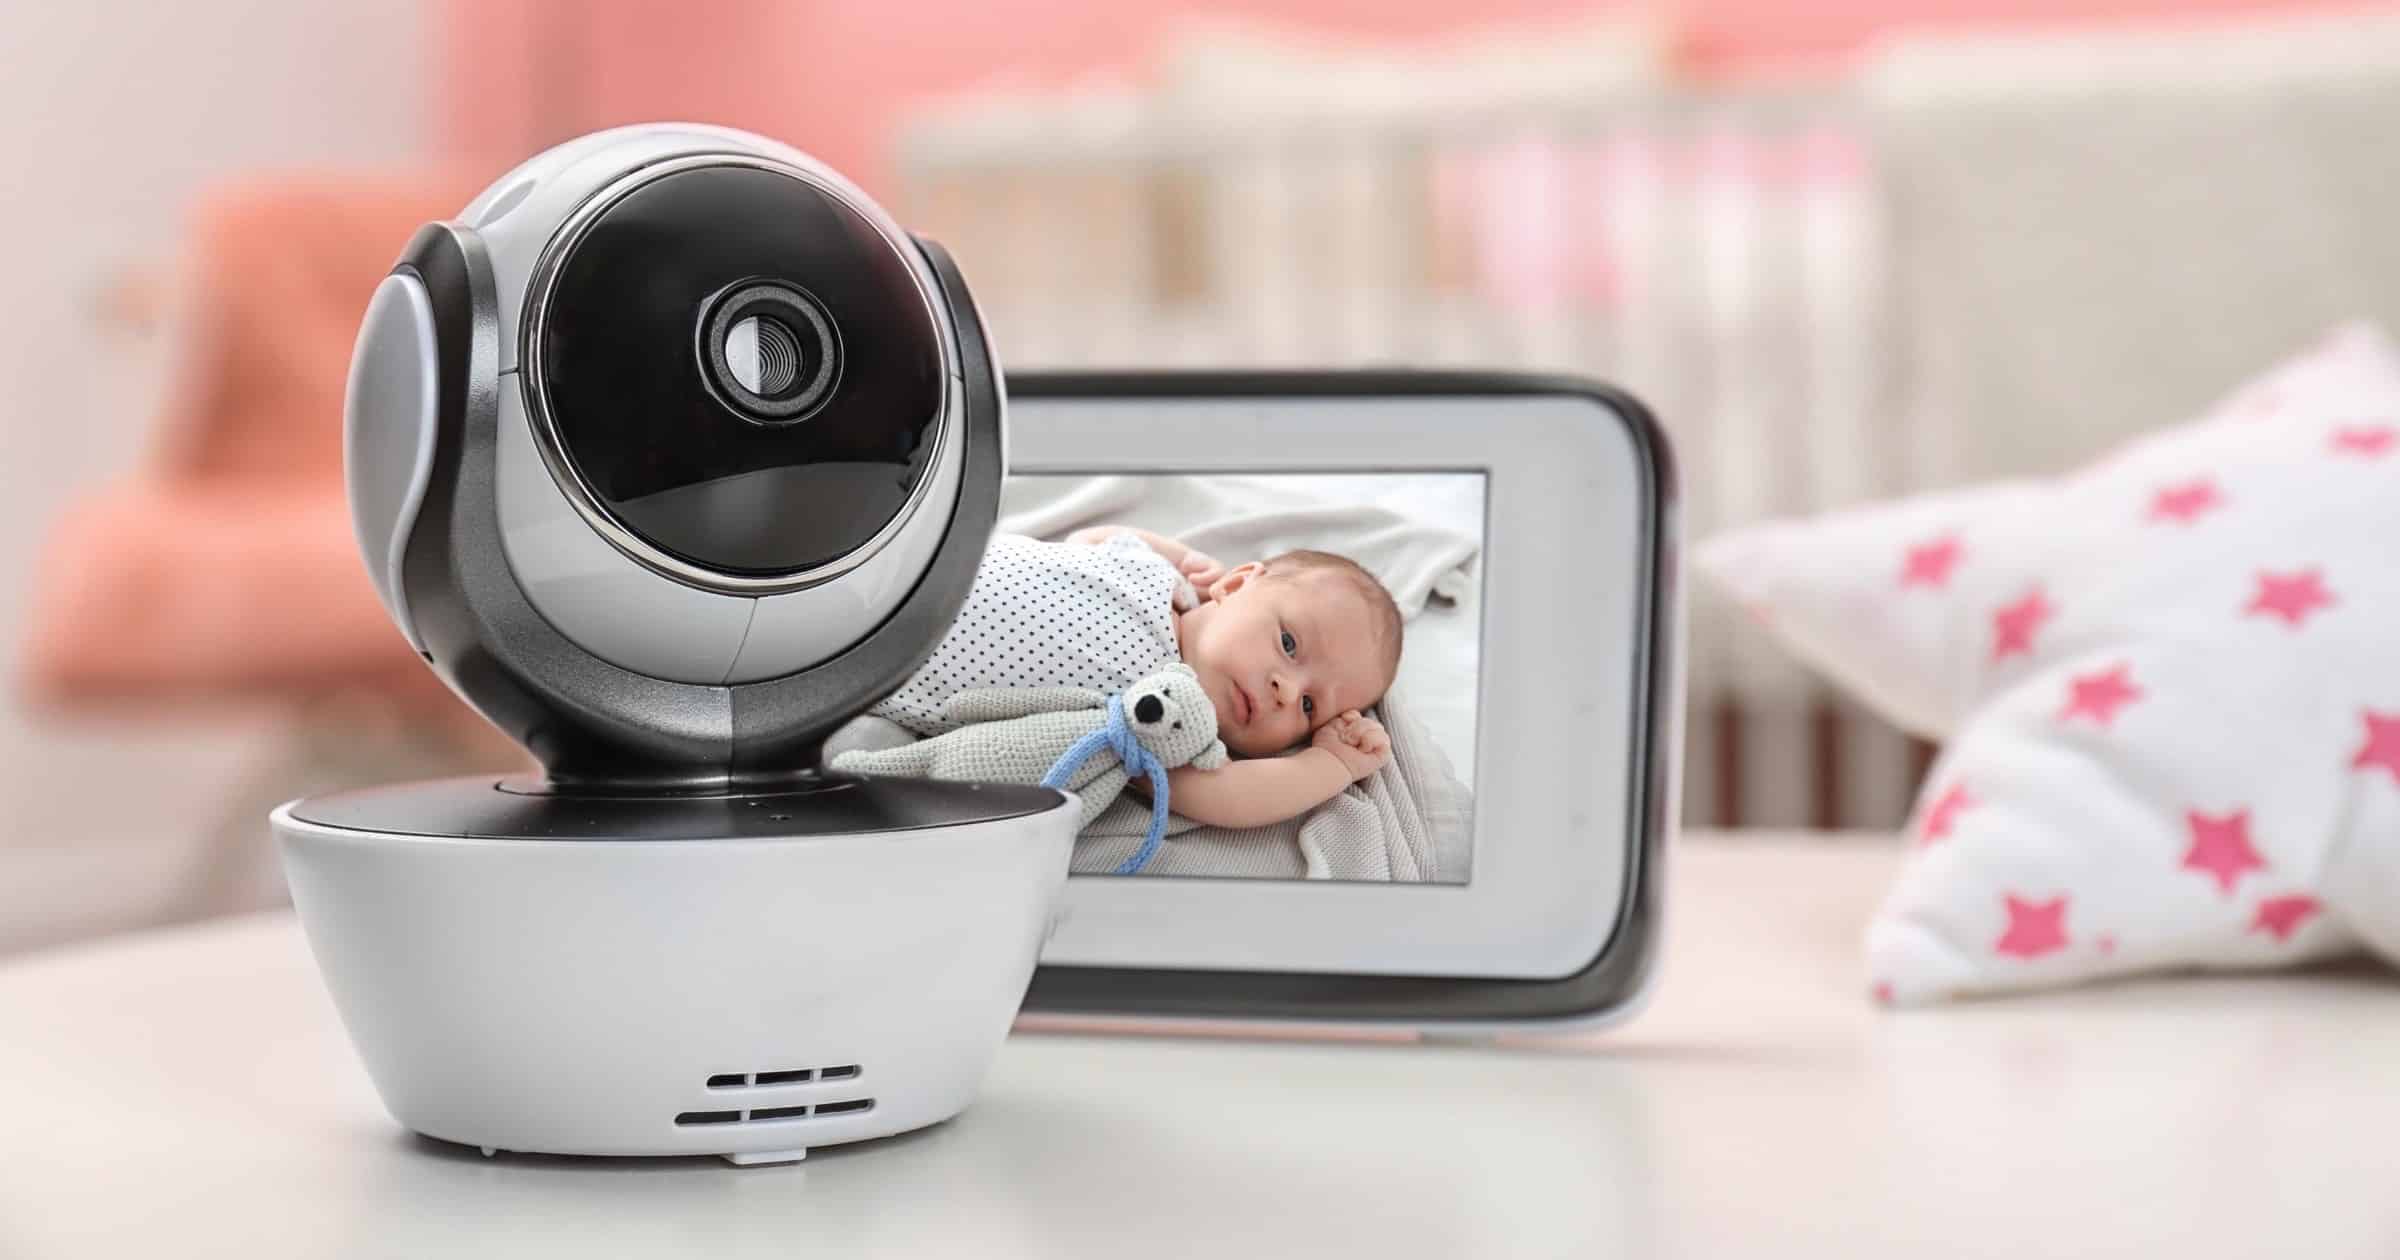 Smart Home Cameras, Baby Monitors Affected by Software Bug